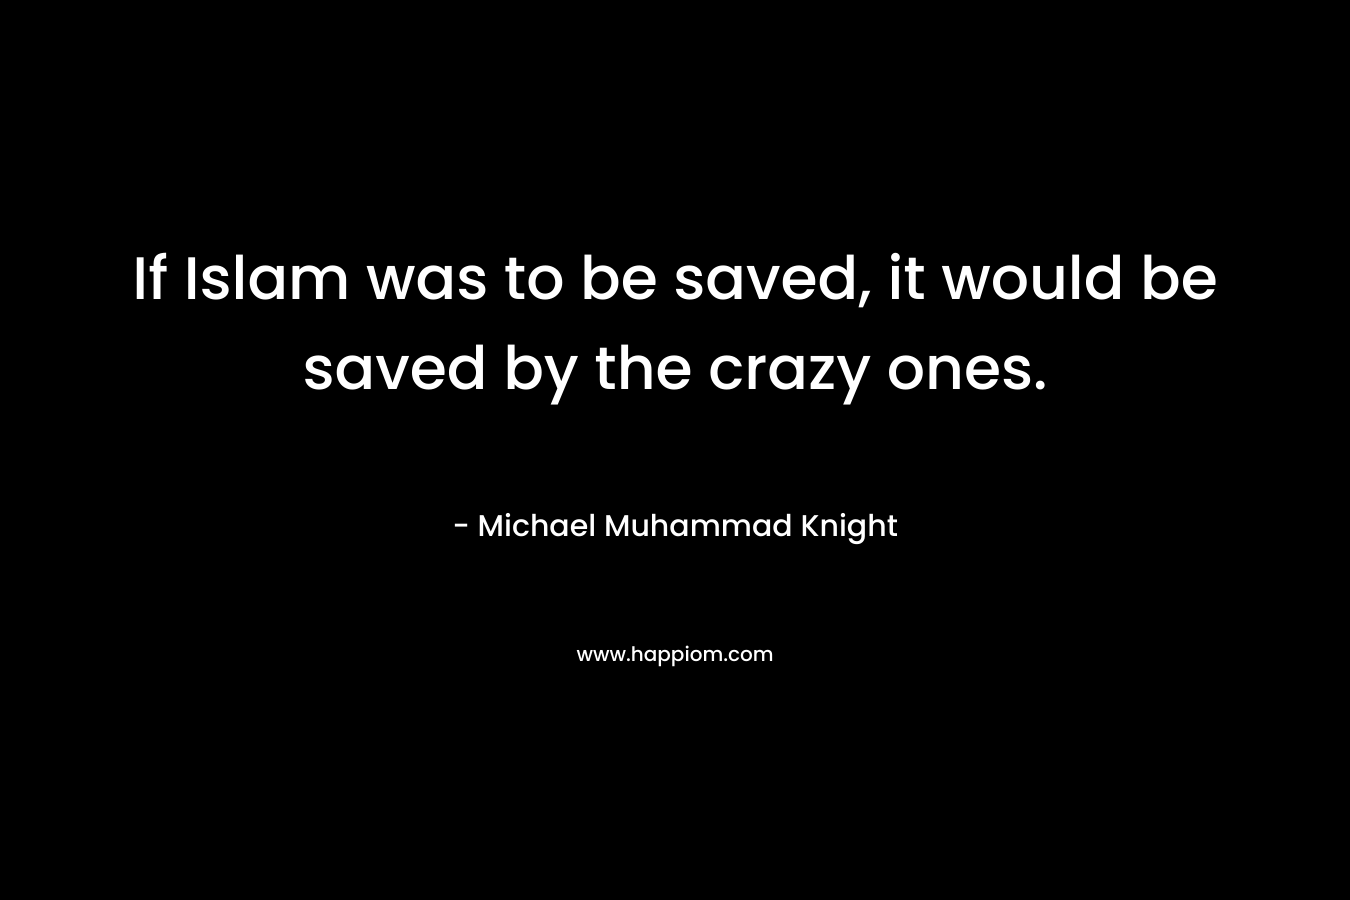 If Islam was to be saved, it would be saved by the crazy ones. – Michael Muhammad Knight